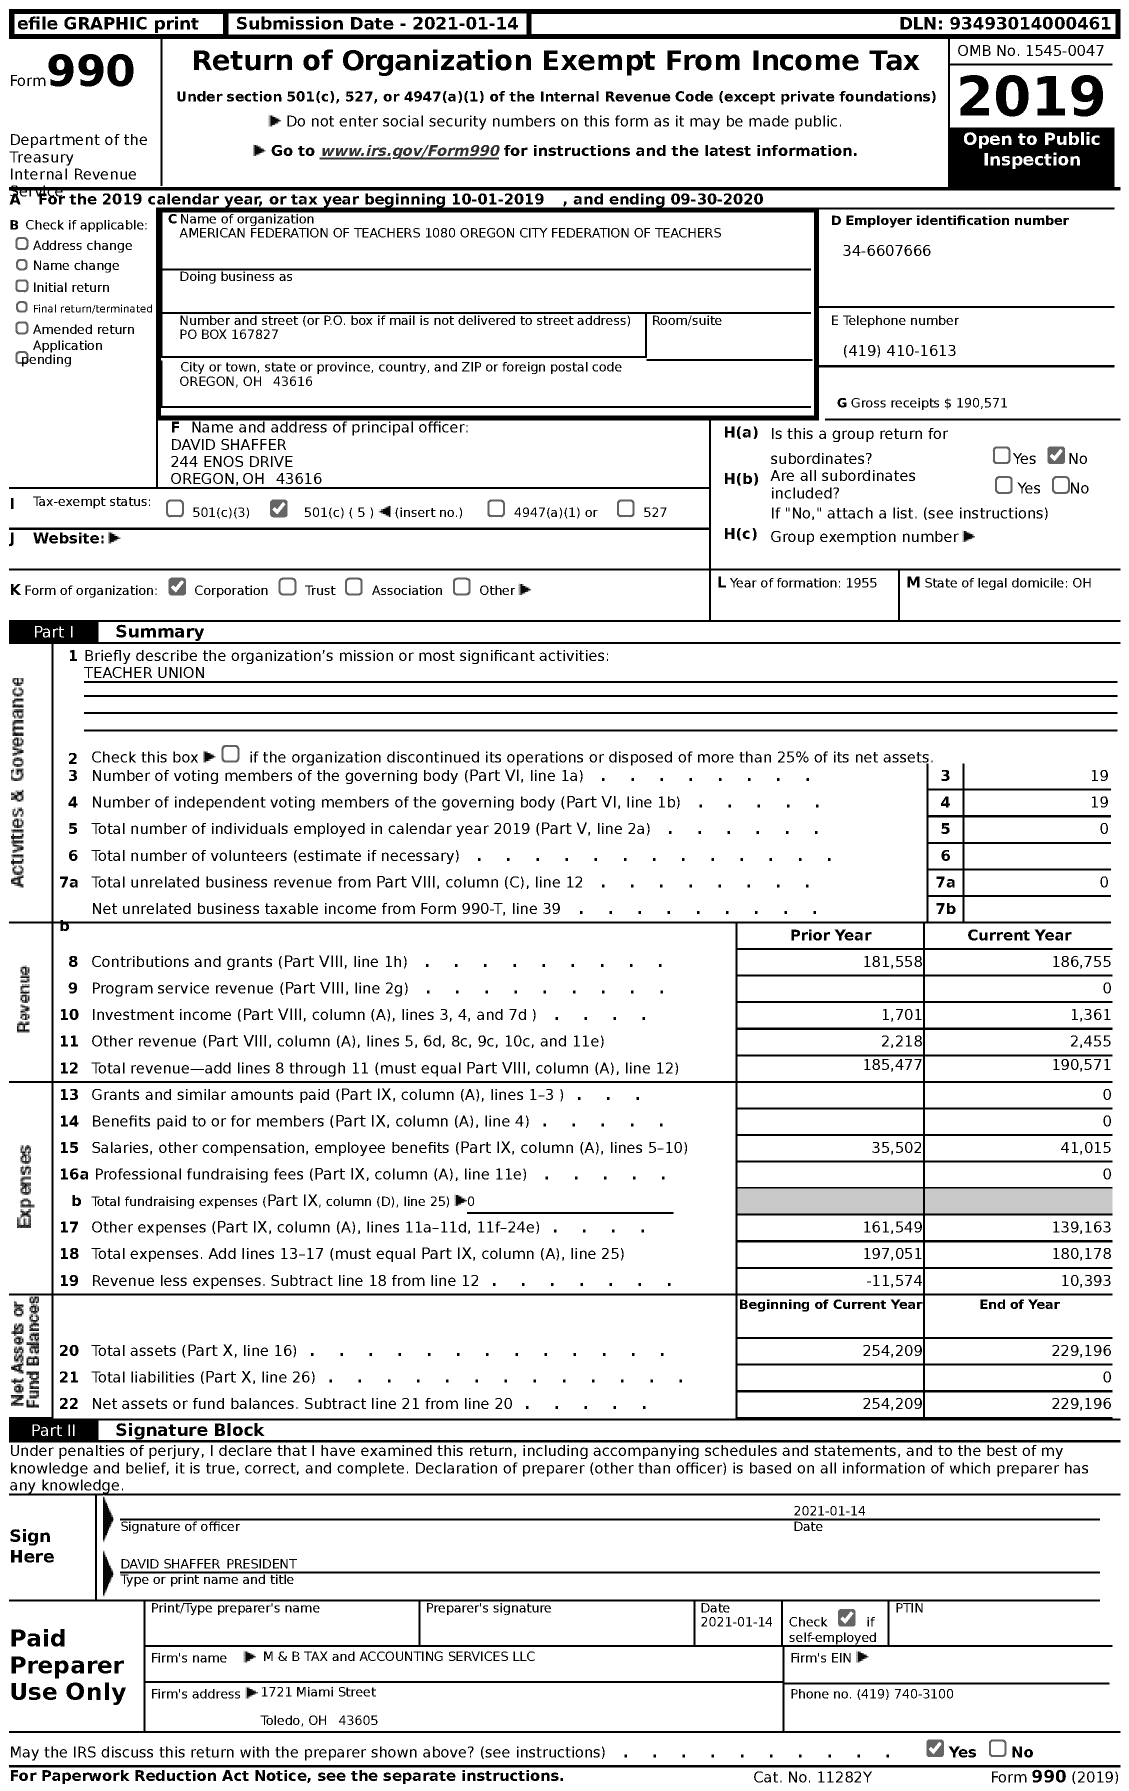 Image of first page of 2019 Form 990 for American Federation of Teachers - 1080 Oregon City Federation of Teac